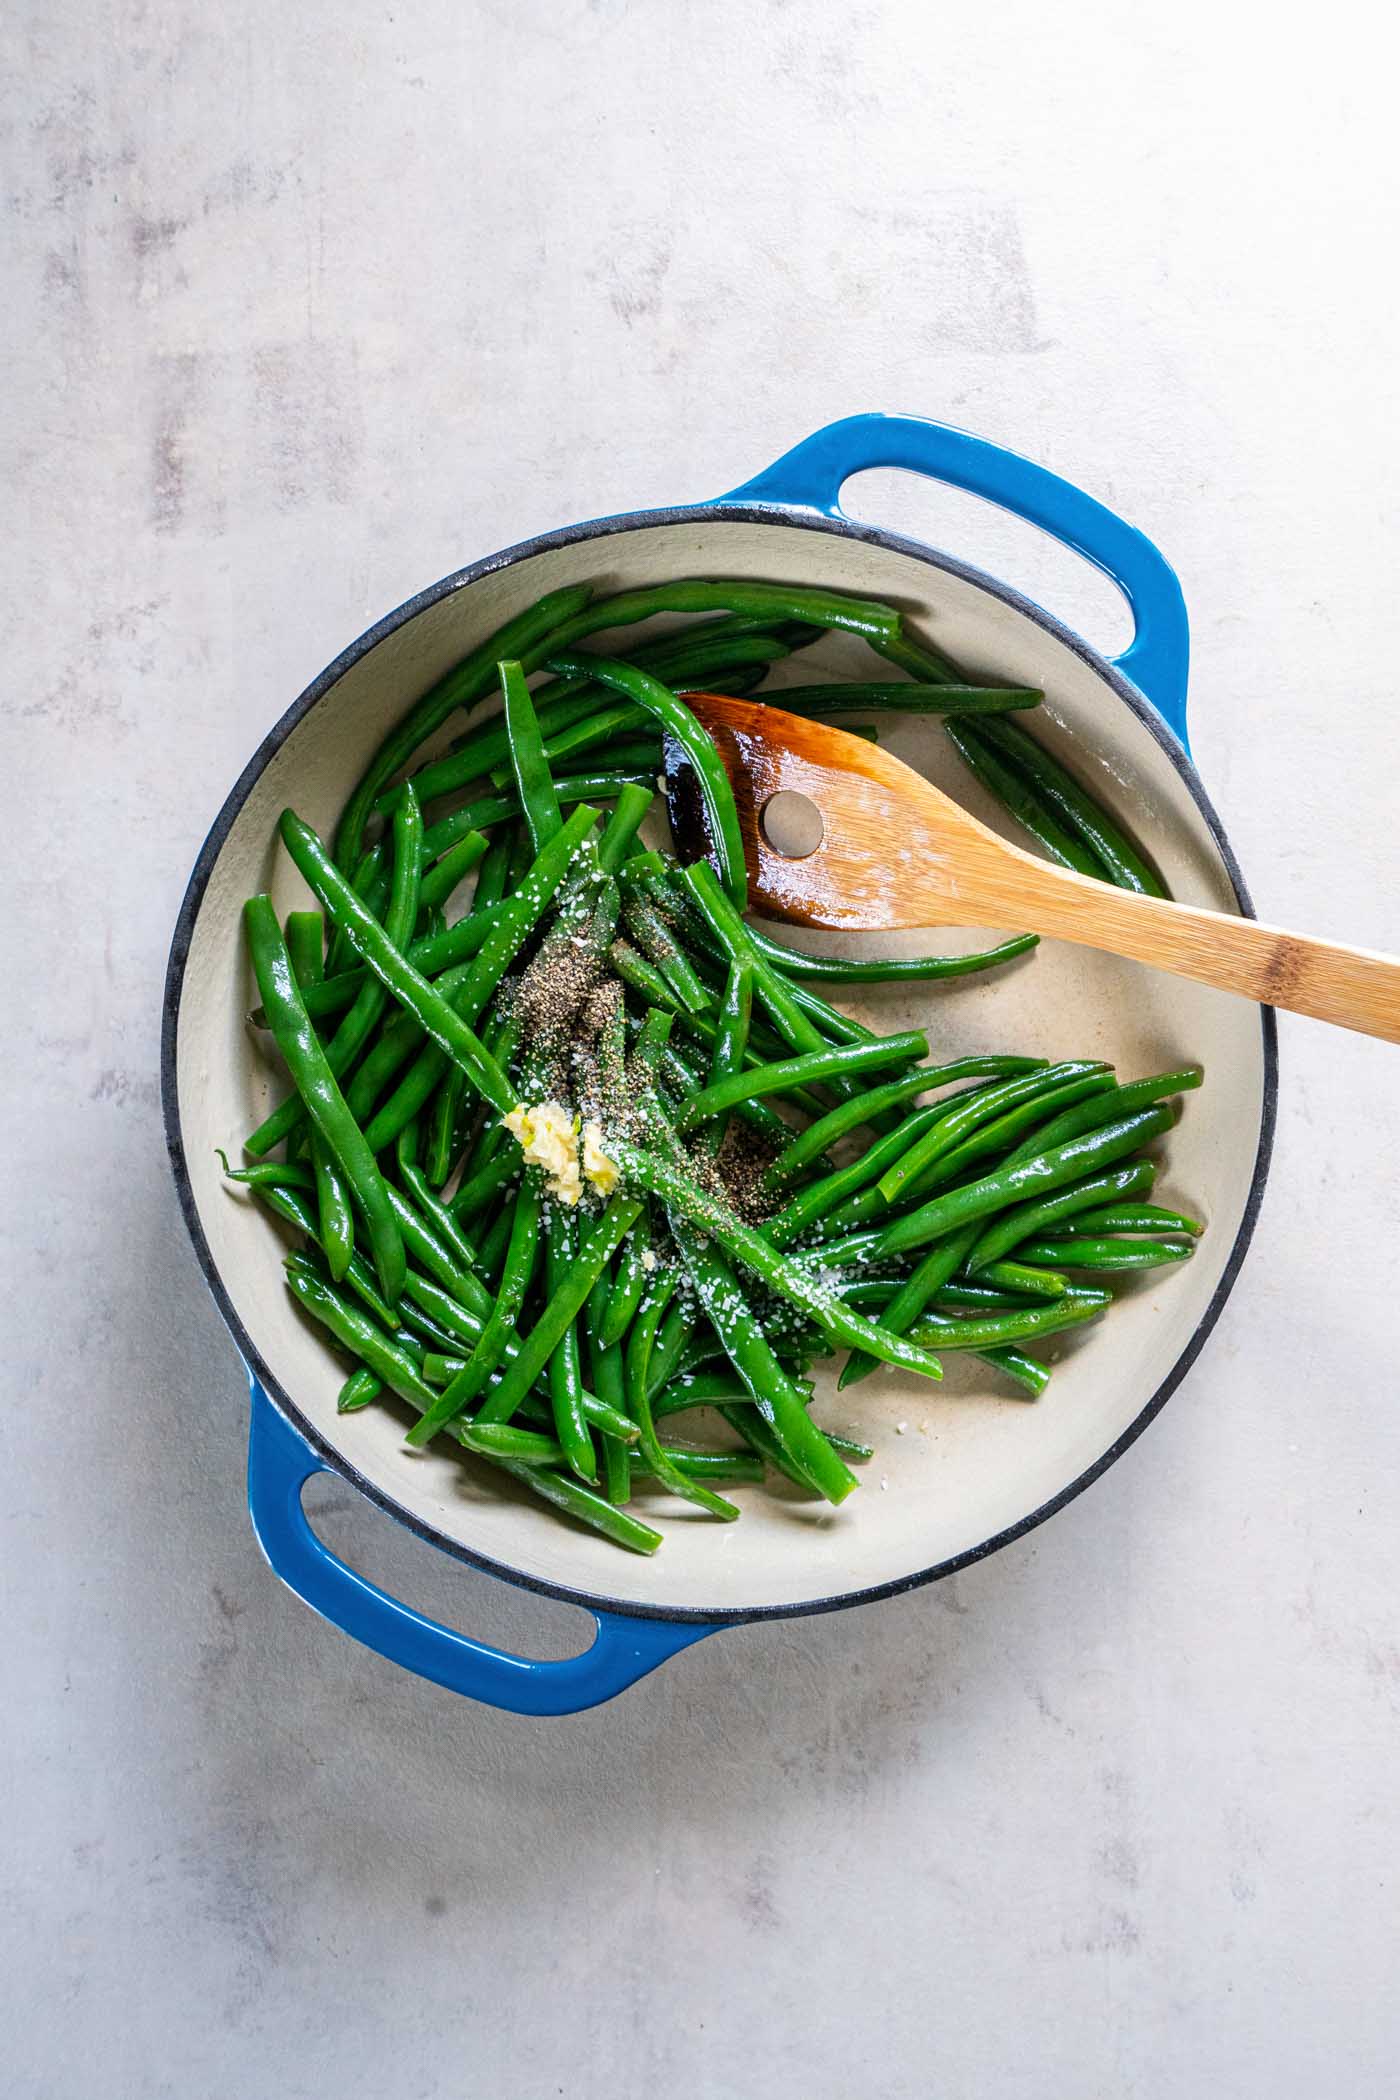 Minced garlic, salt and pepper added to green beans in skillet.